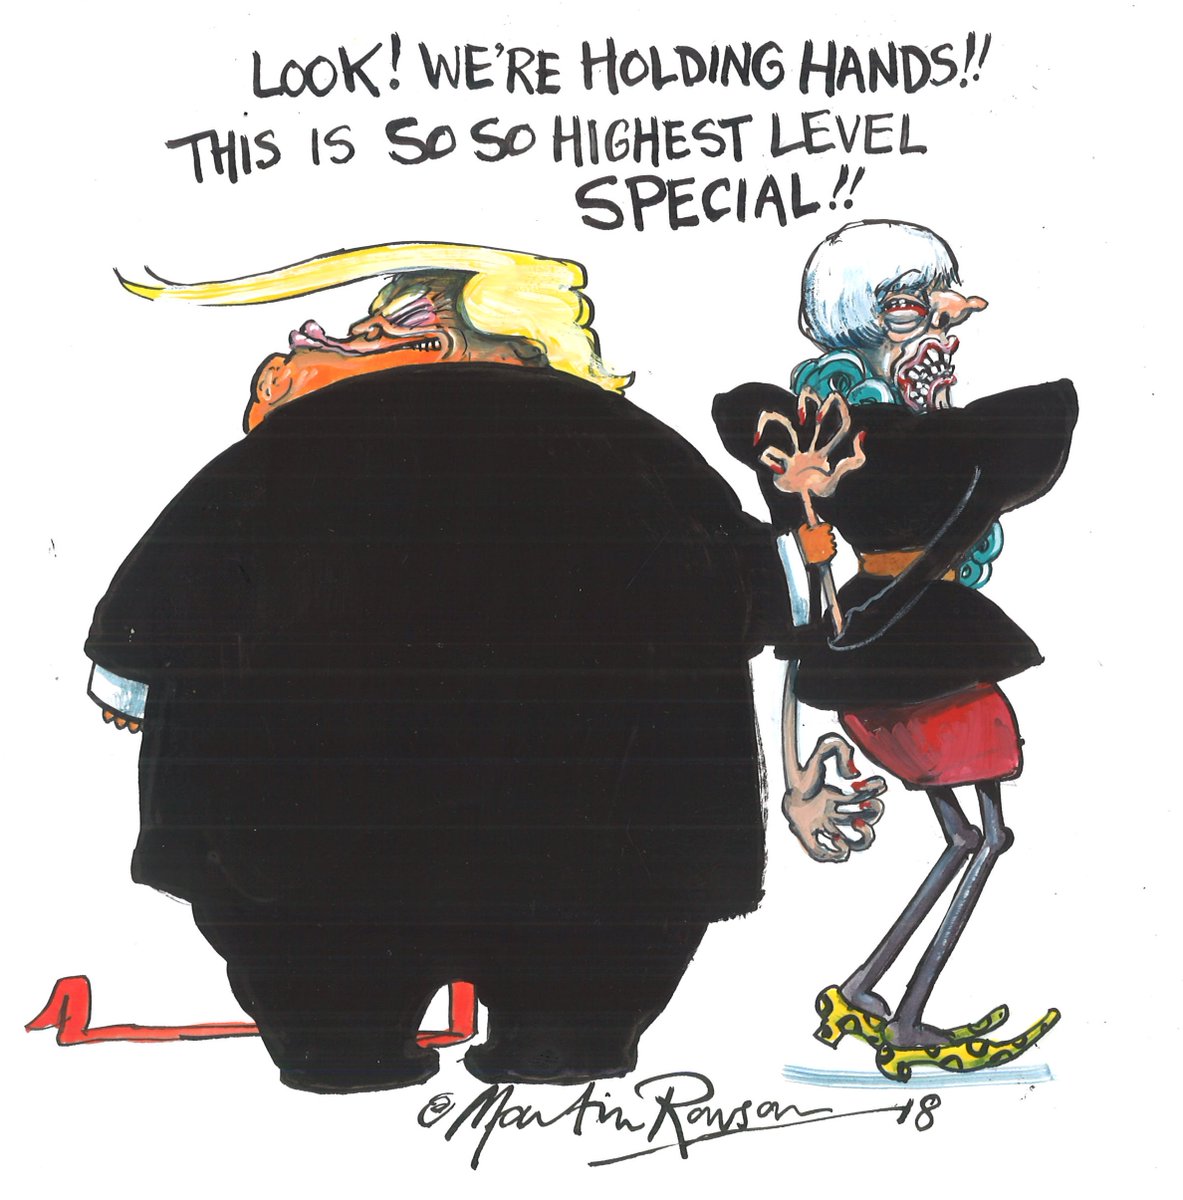 ...and as we stumbled further in 2018, here's happy memories of Trumpy'd trademark handshake! From  @Kevin_Maguire's  @DailyMirror column